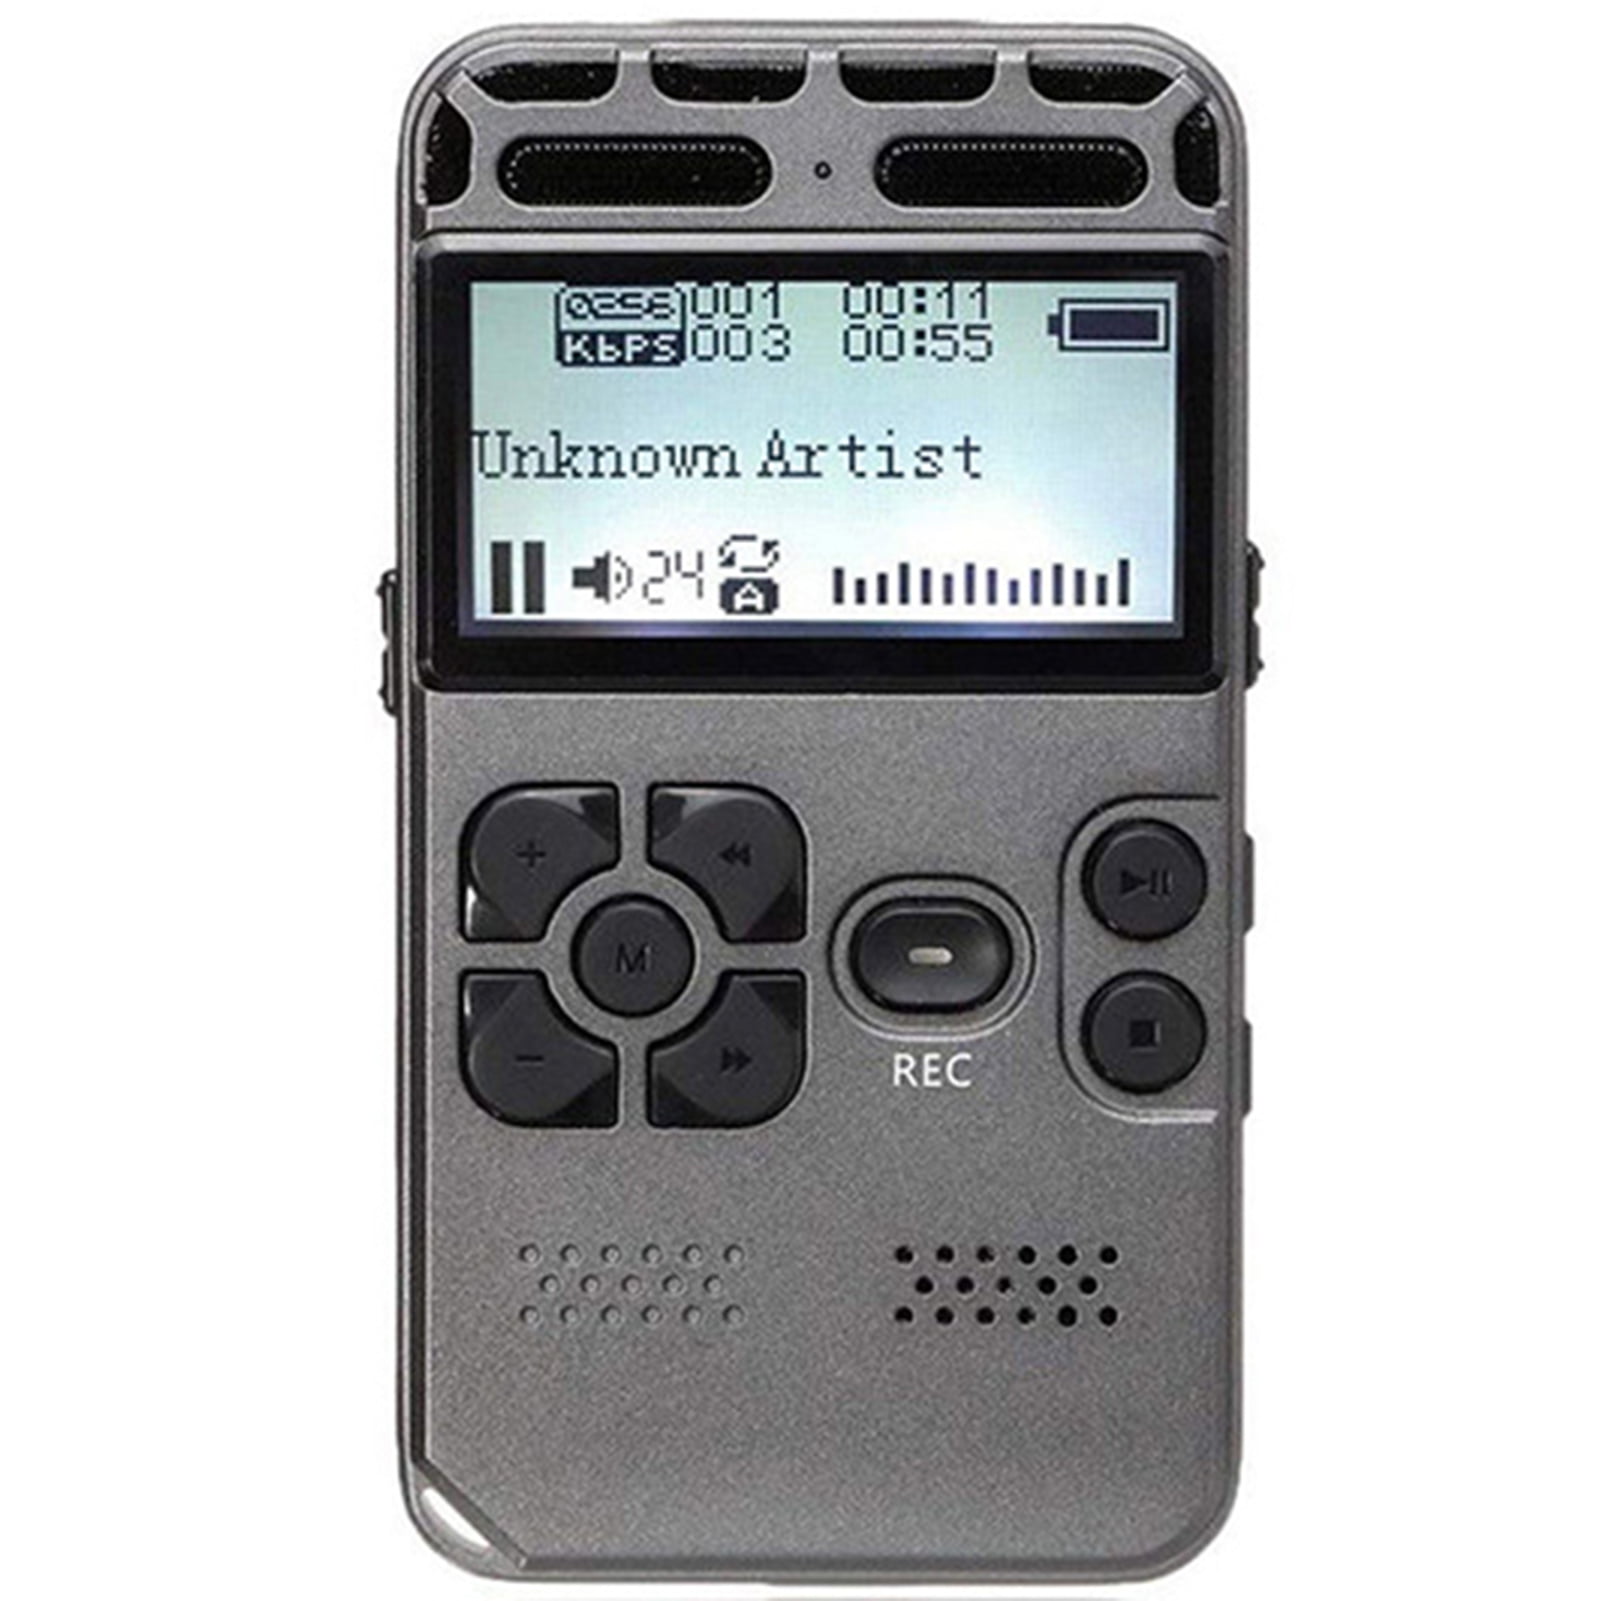 64GB Rechargeable LCD Digital Audio Sound Voice Recorder Dictaphone MP3 Player